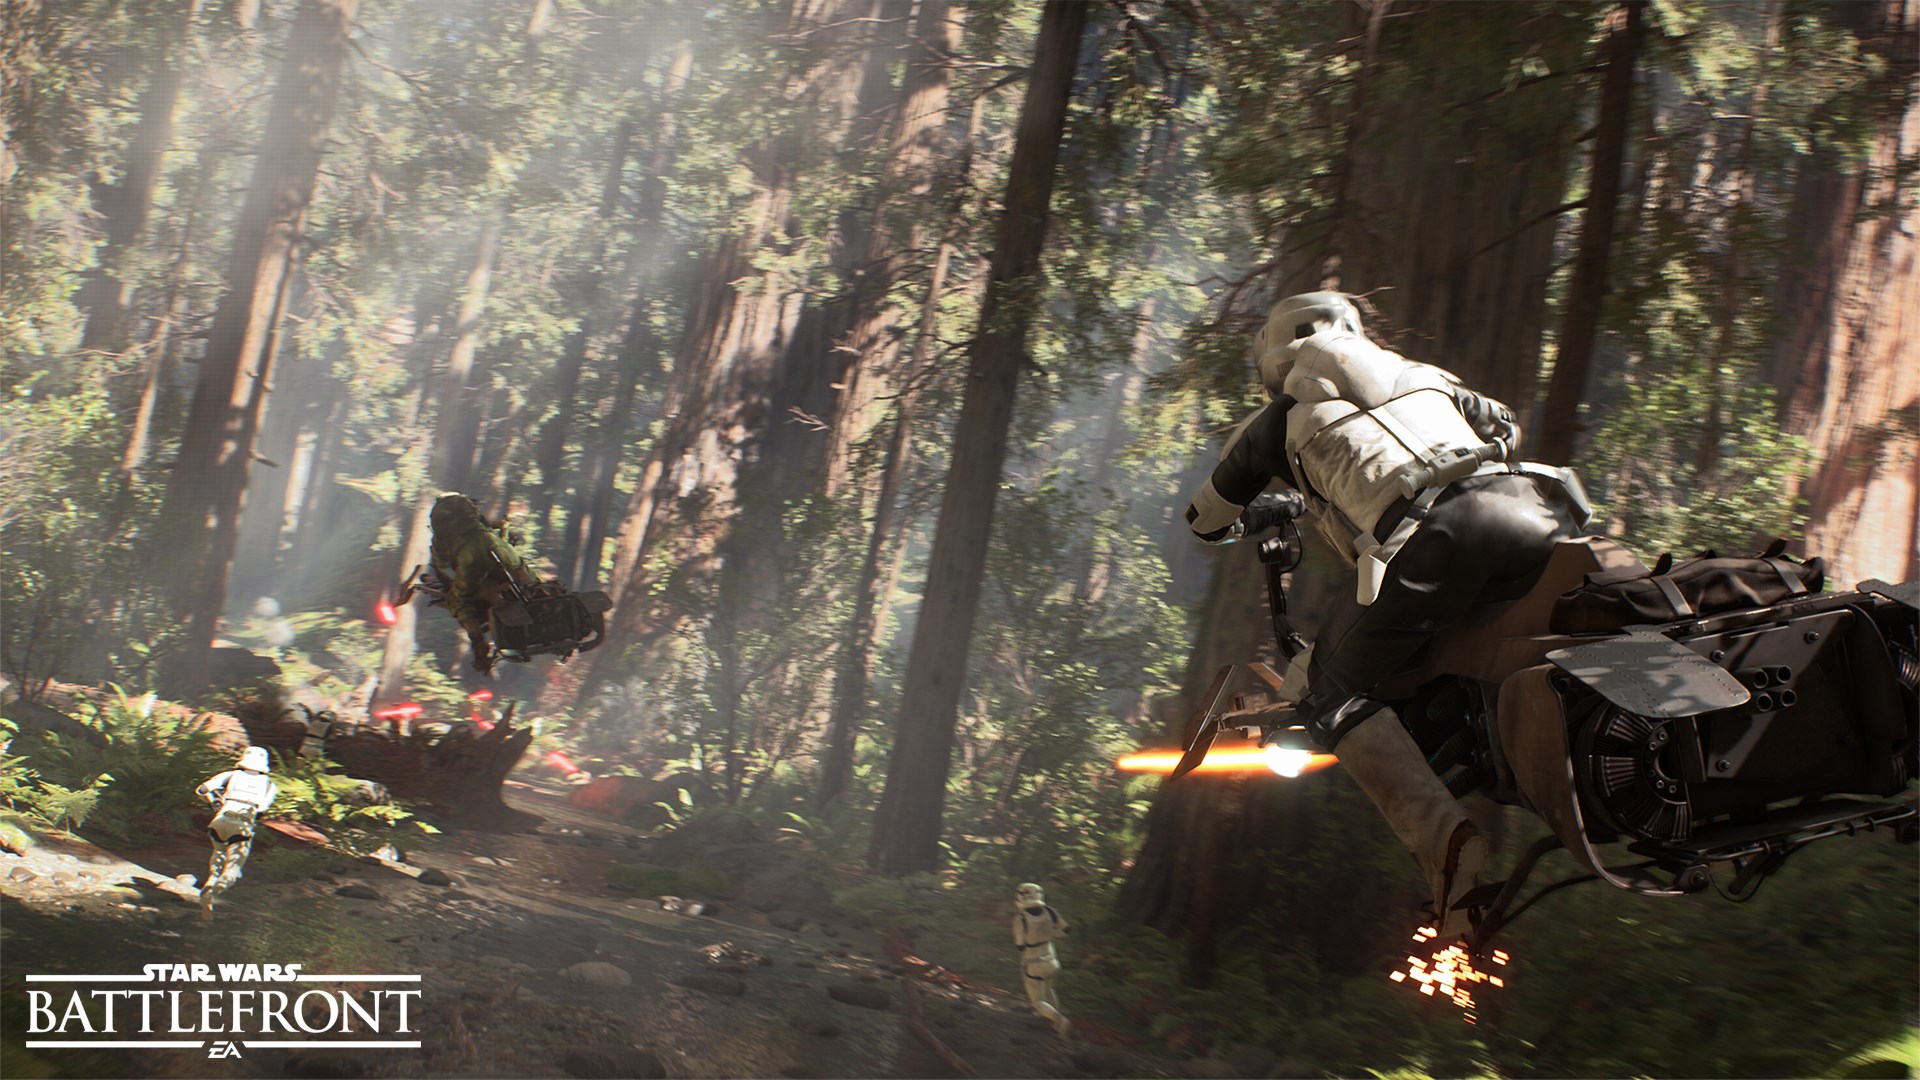 New Star Wars Battlefront Trailer Vehicles And